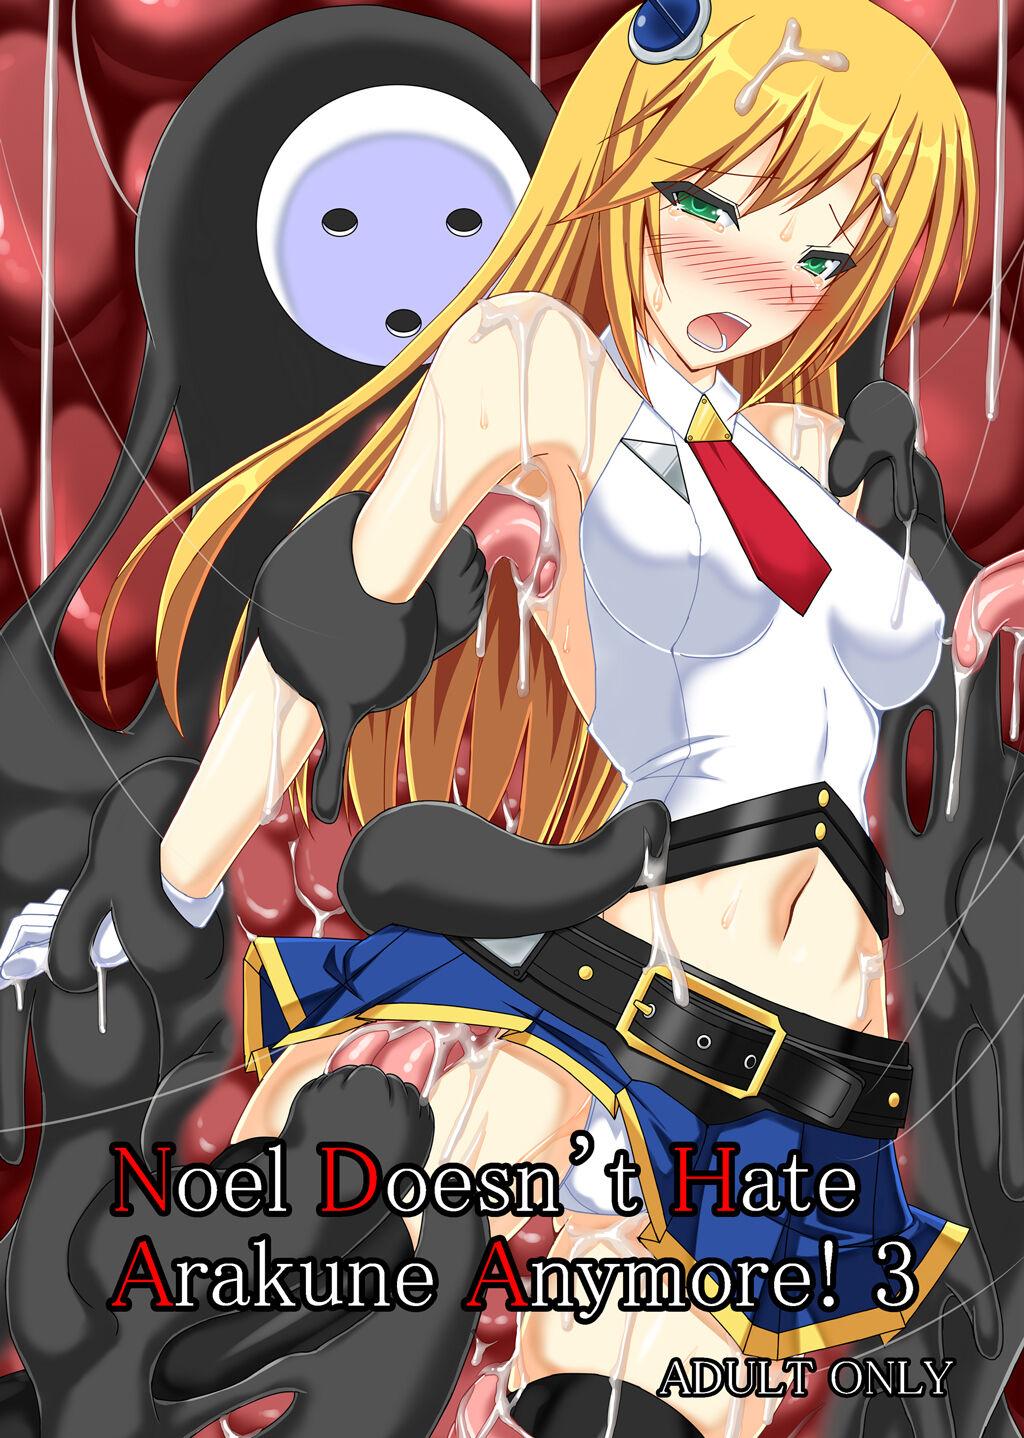 Licking Pussy Noel Doesn't hate Arakune Anymore! 3 - Blazblue Tight - Picture 1